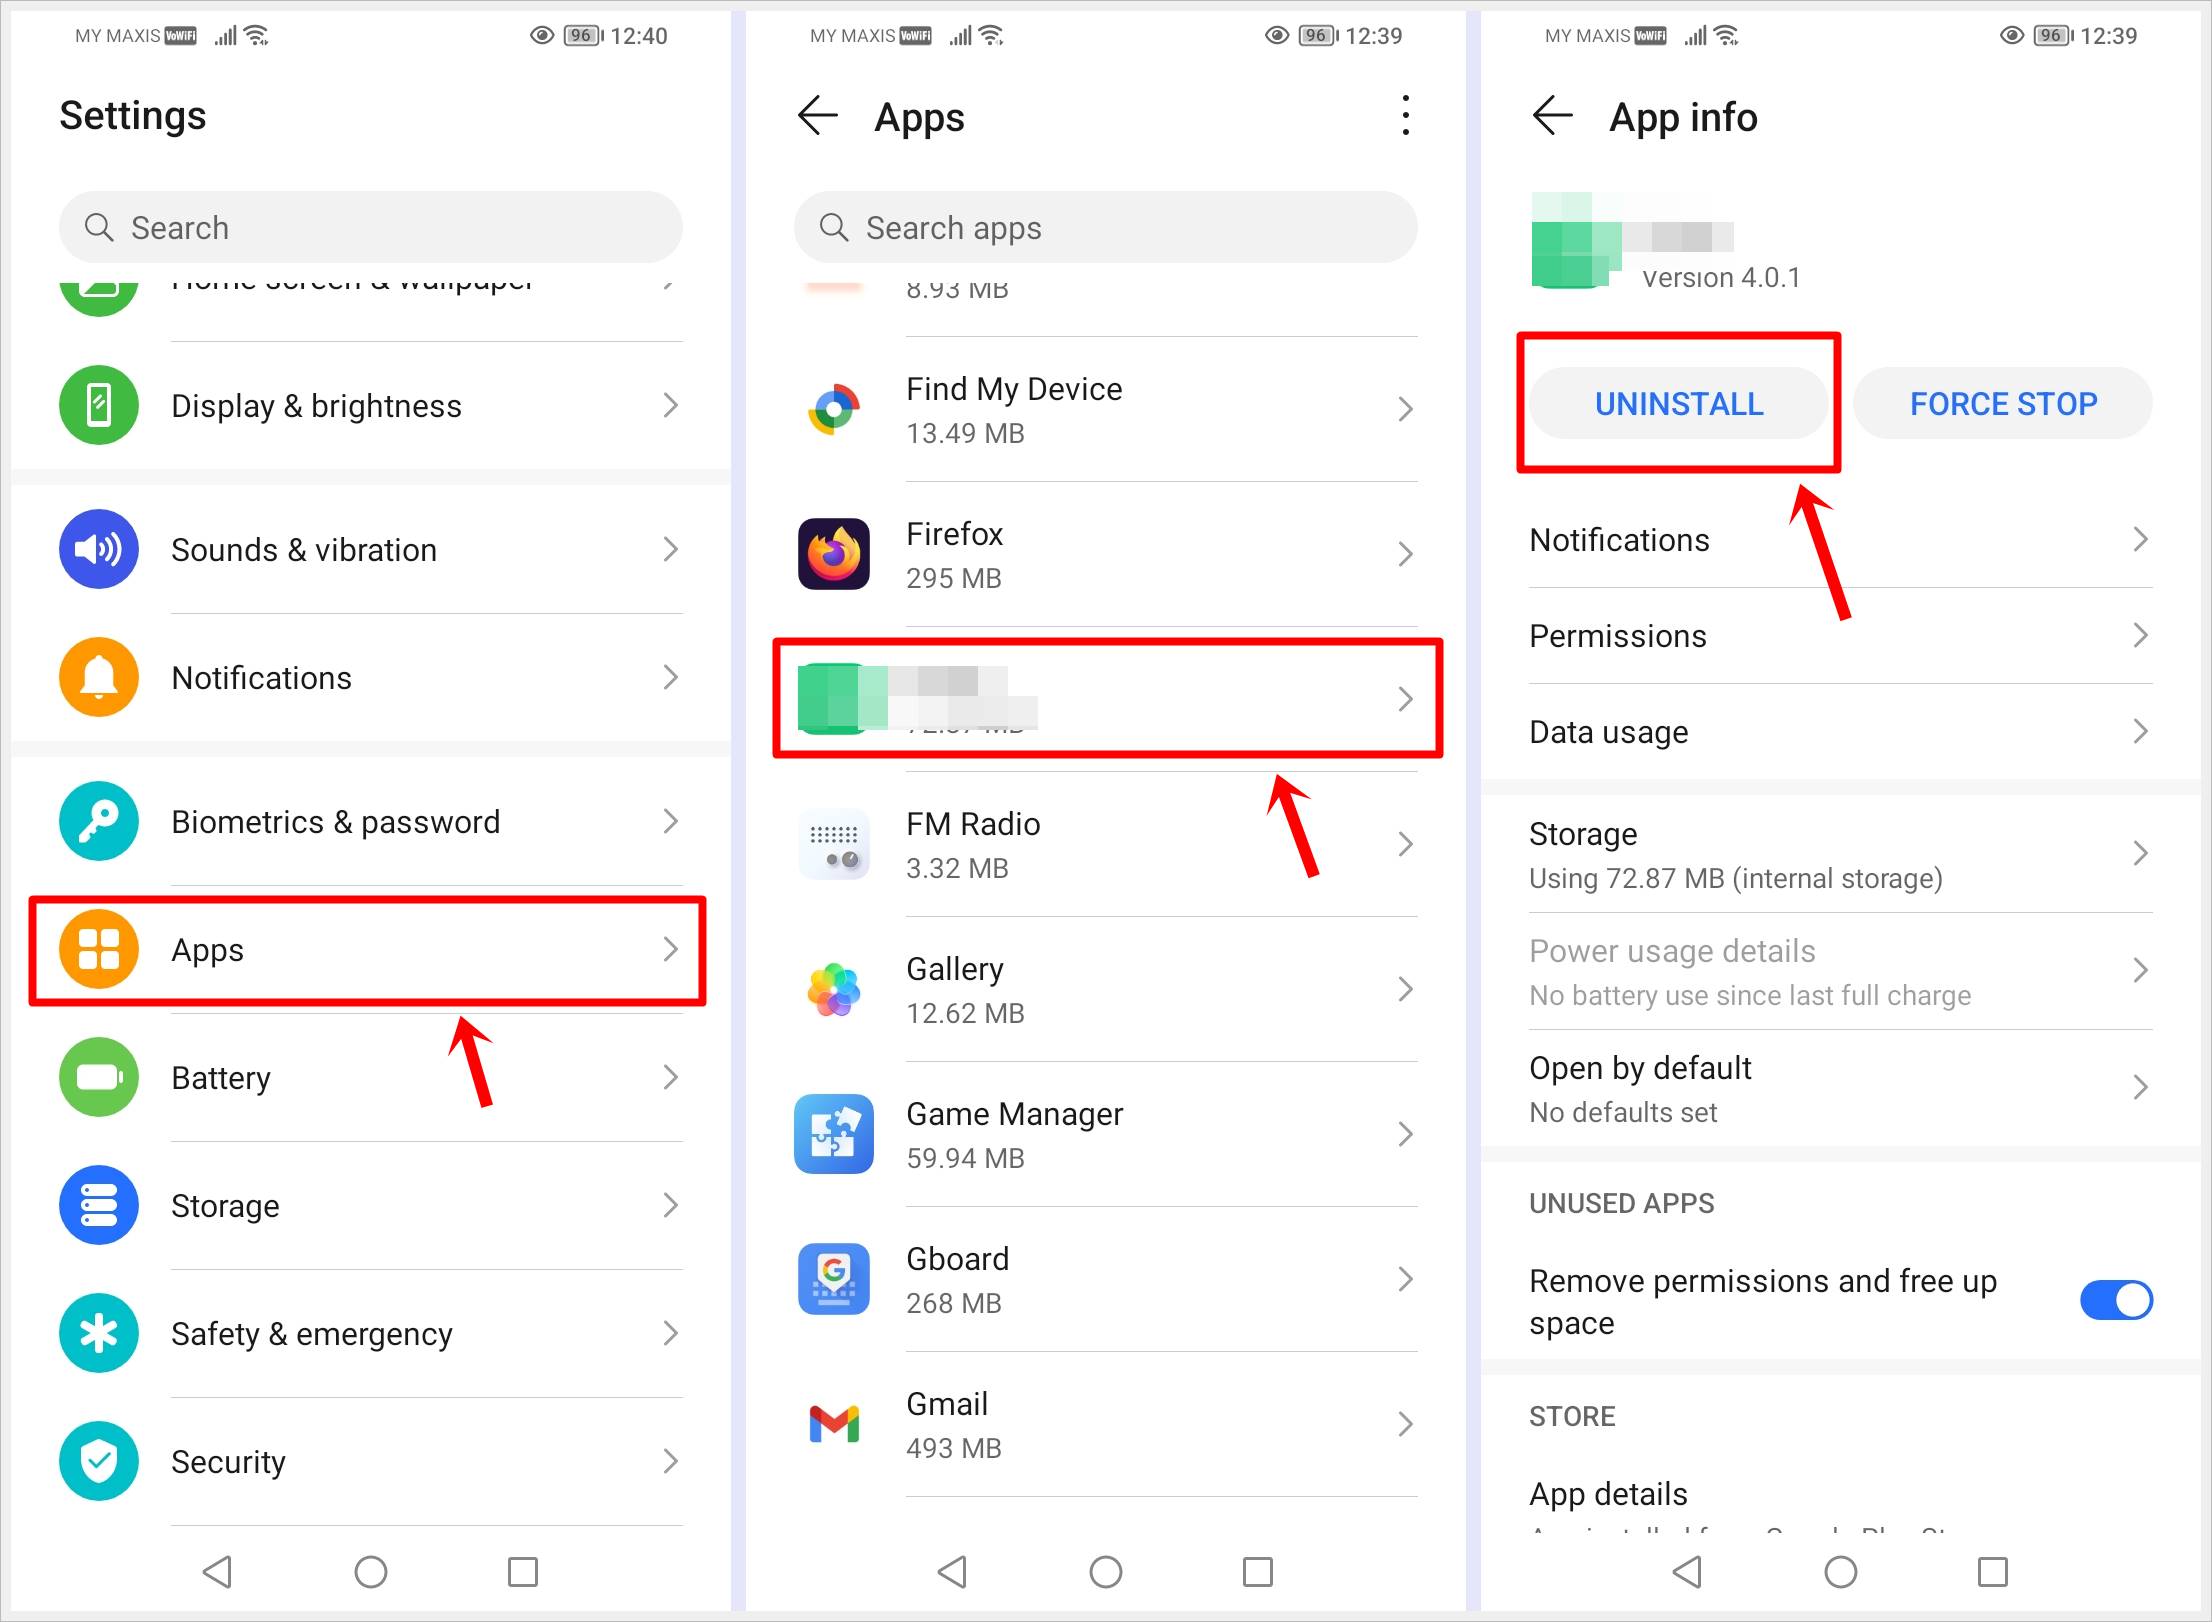 How to fix ghost touch on Android phones: This image displays three screenshots of an Android phone: the first is the 'Settings' page with the 'Apps' option highlighted, the second is the 'Apps' page with one of the installed apps highlighted, and the third is the 'App Info' page with the 'Uninstall' button highlighted.